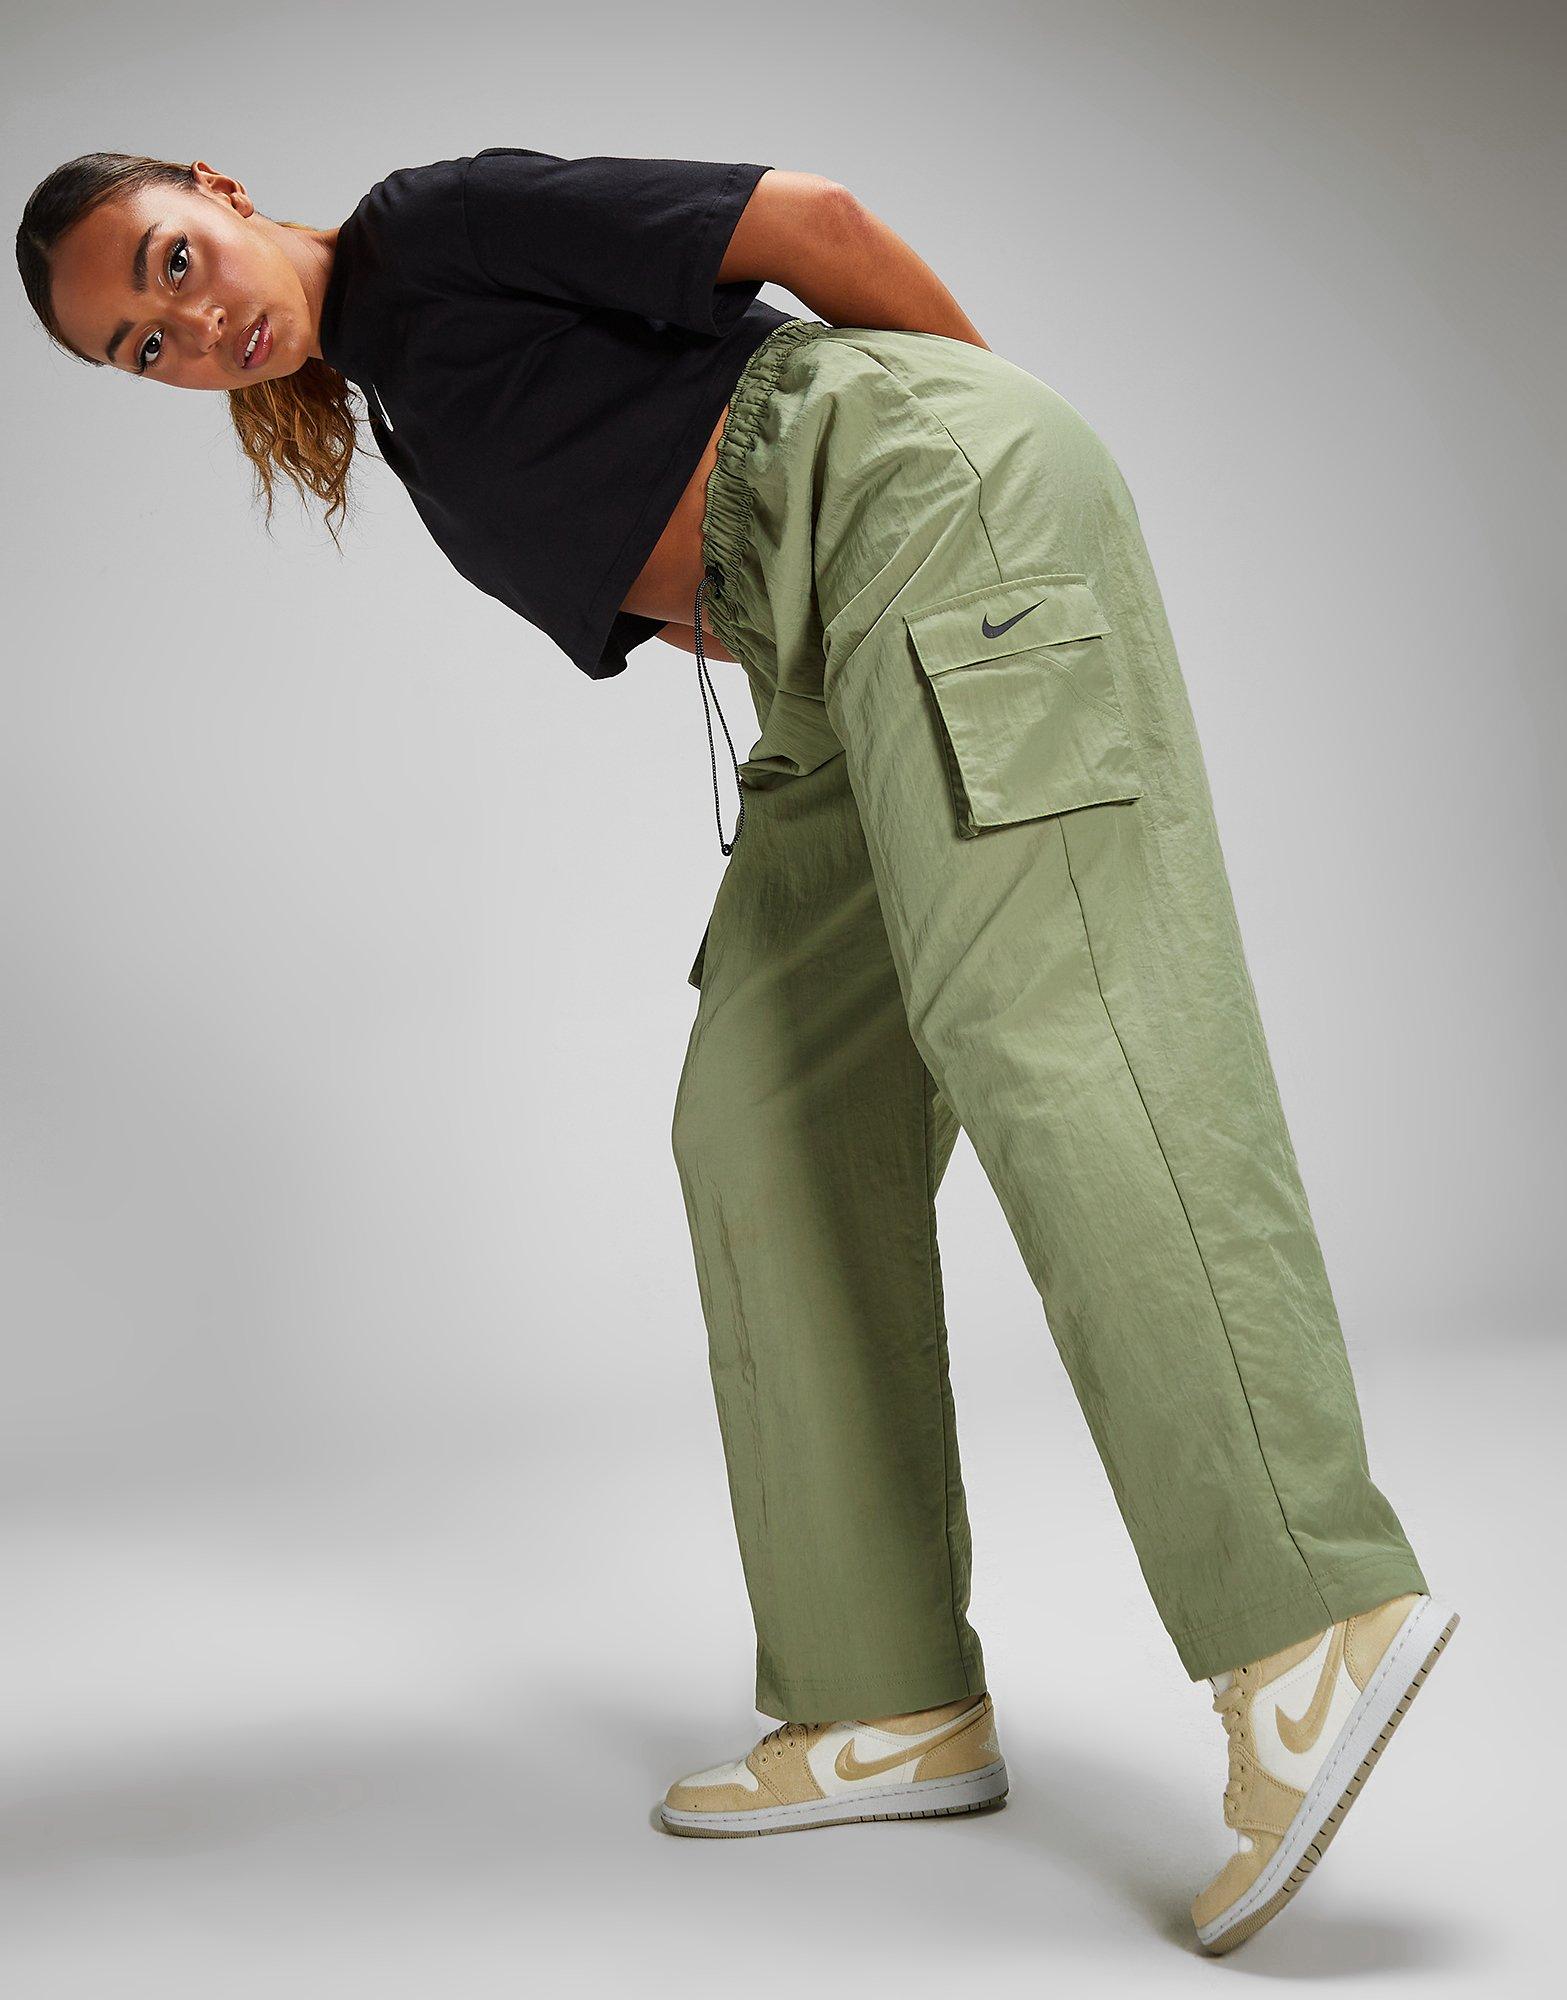 Premium Photo  Girl in green cargo pants and a t-shirt